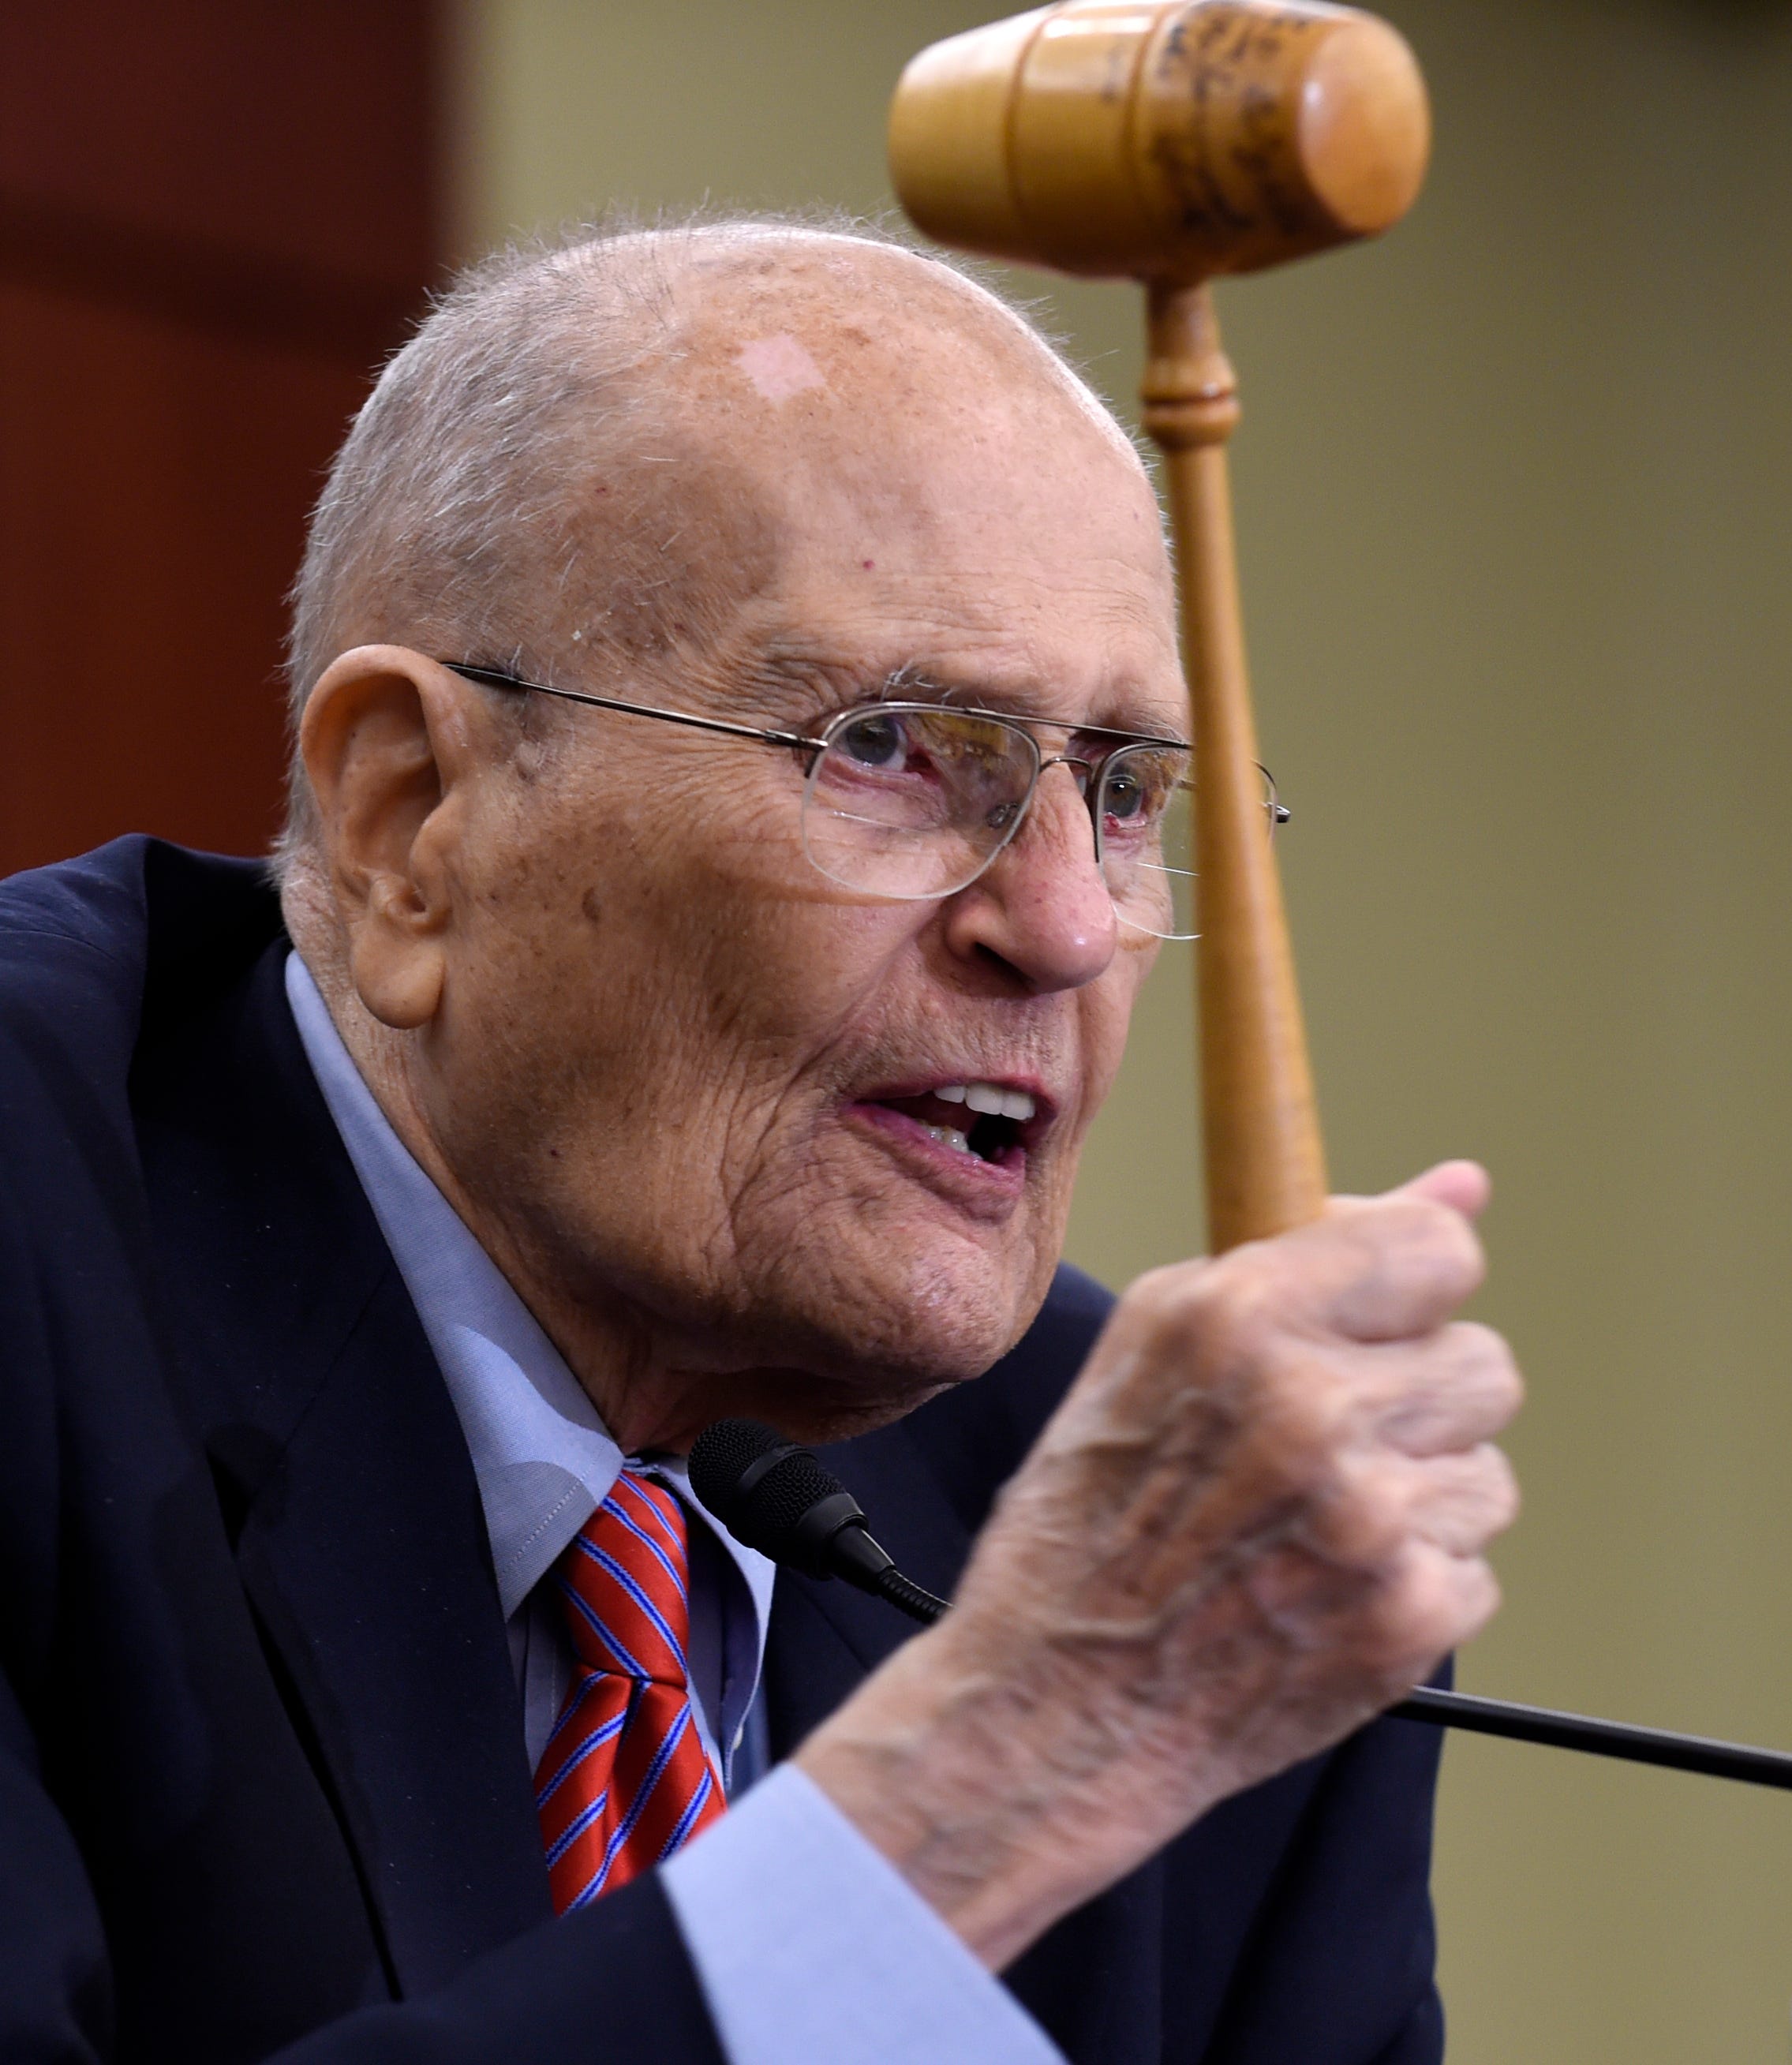 Former Michigan Rep. John Dingell holds up the gavel he used 50 years ago when Medicare legislation was passed, as he speaks at an event marking the 50th anniversary of Medicare and Medicaid,  July 29, 2015, on Capitol Hill.